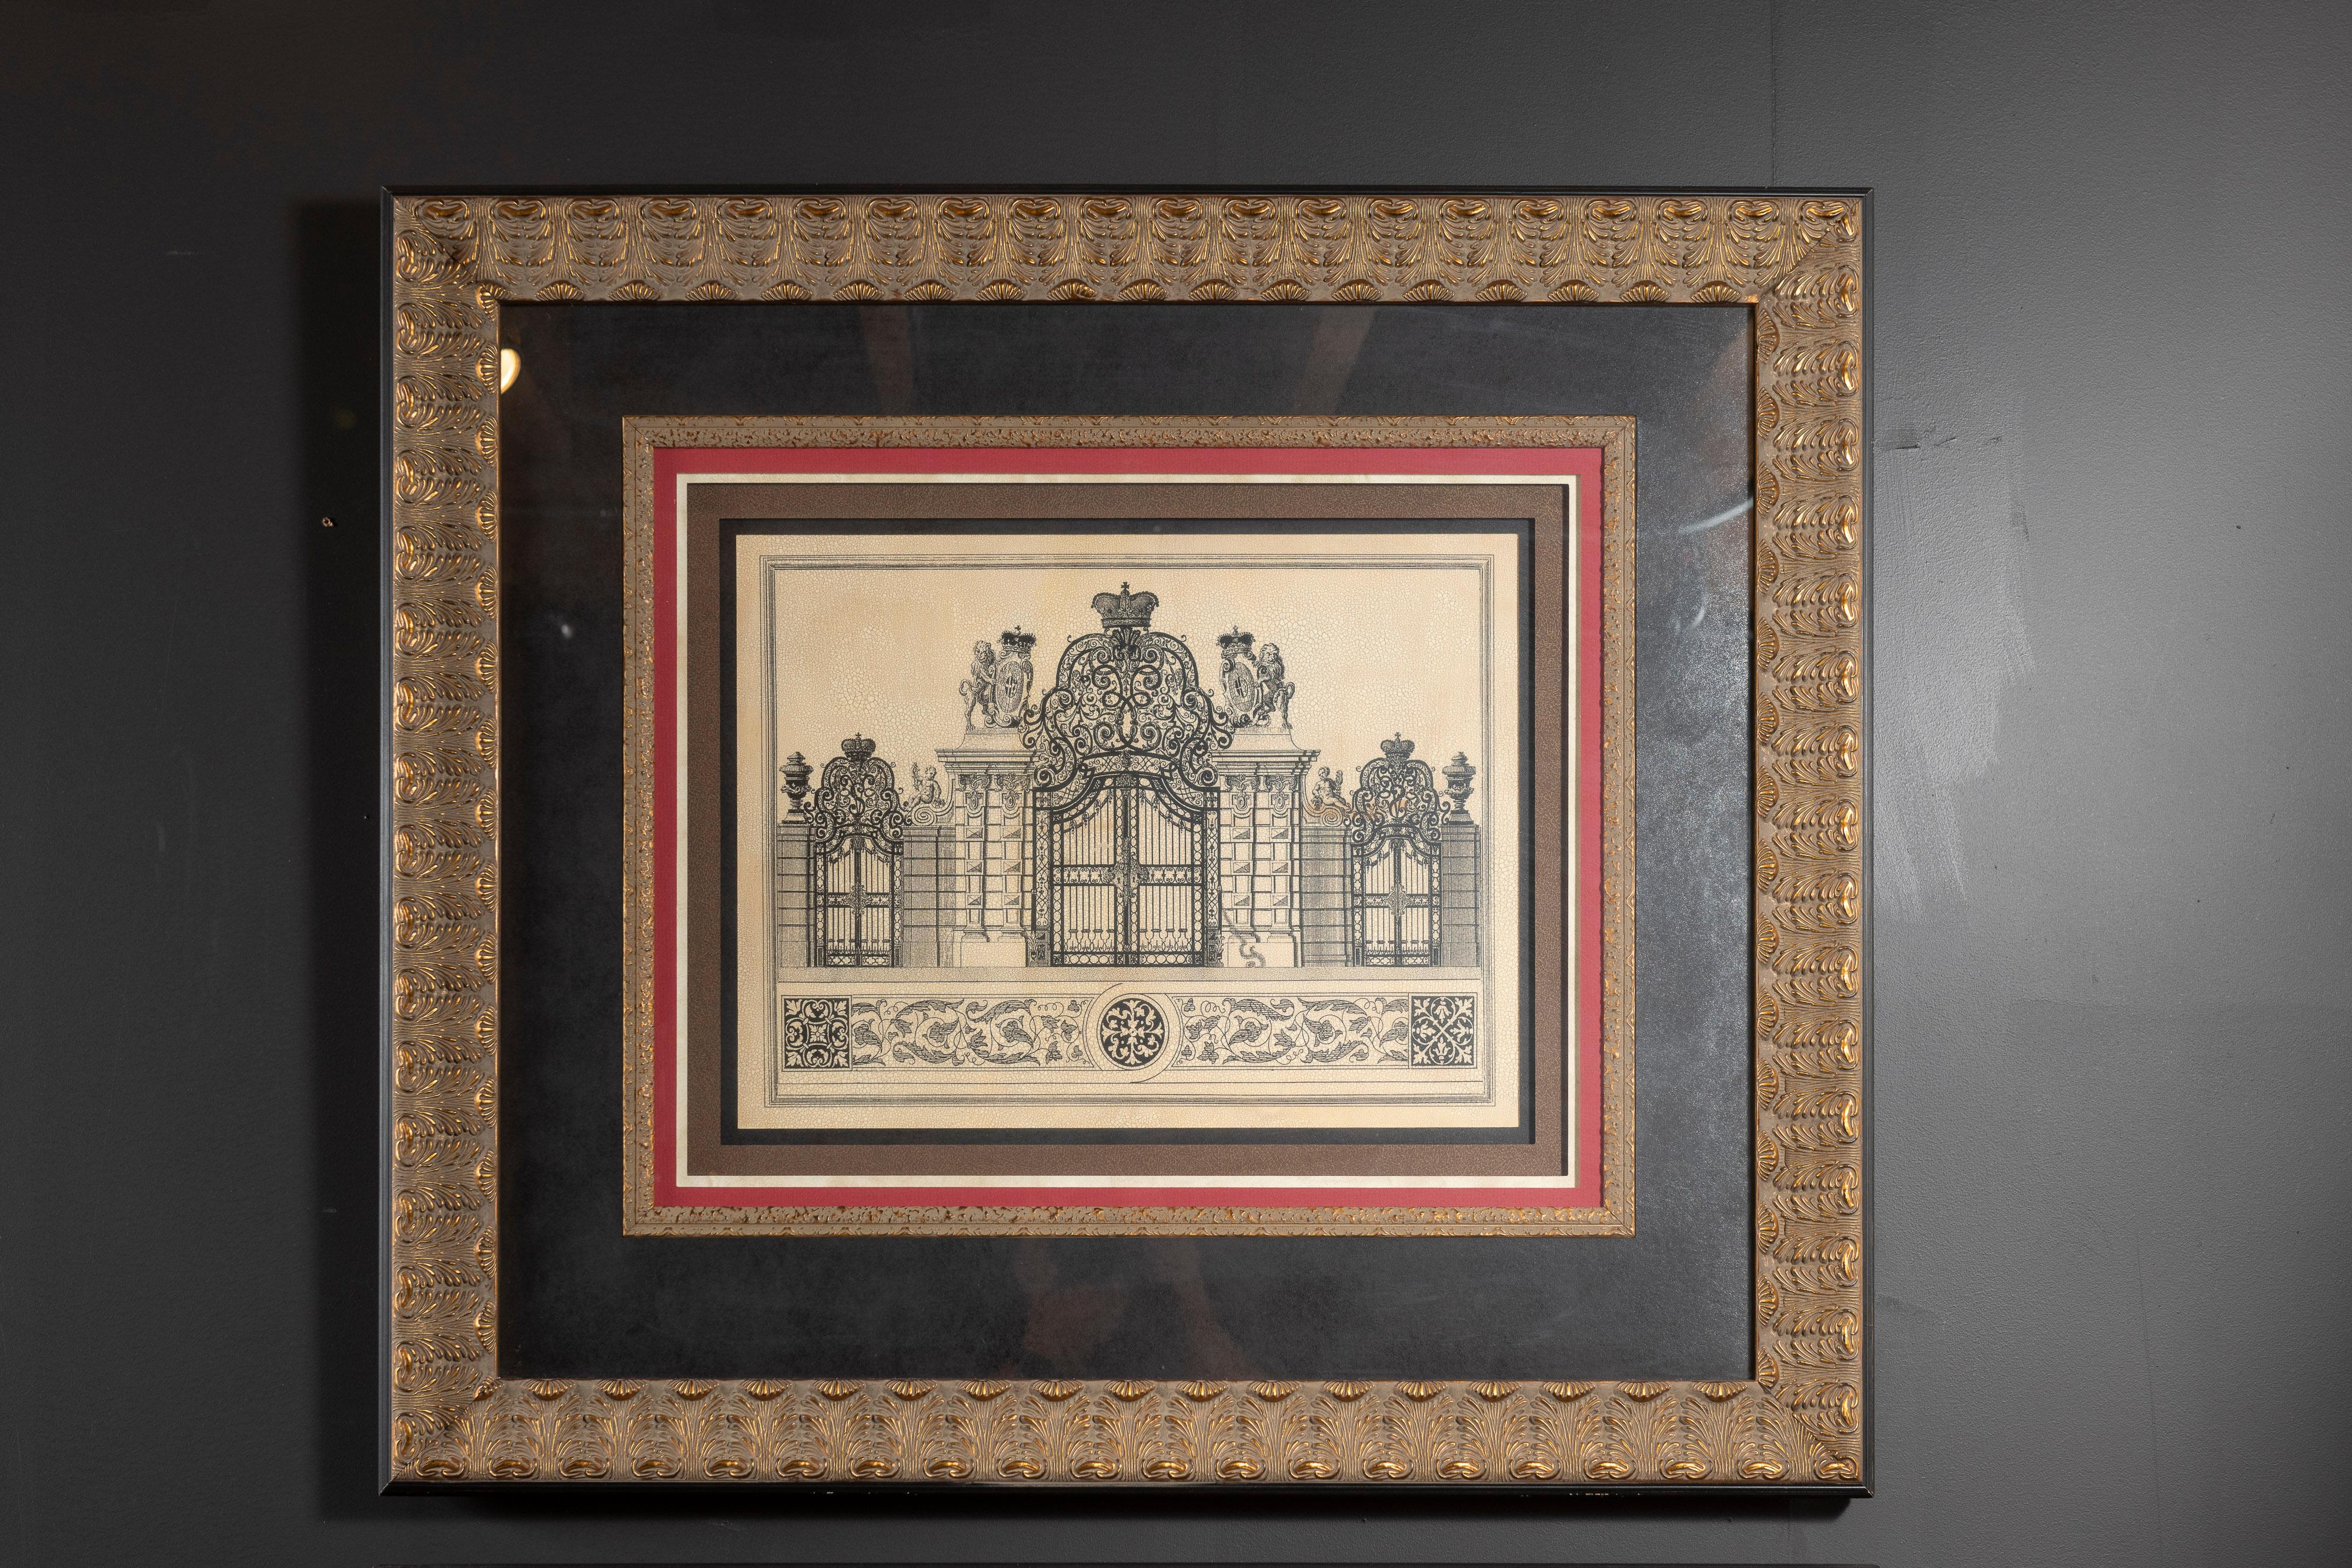 Pair of beautifully framed 20th century crackled paper prints depicting entrances to the Schloss Belvedere Palace in Vienna. One print is of the Main Palace Gate, featuring ornate wrought ironwork, a crown finial and protective lions with shields.